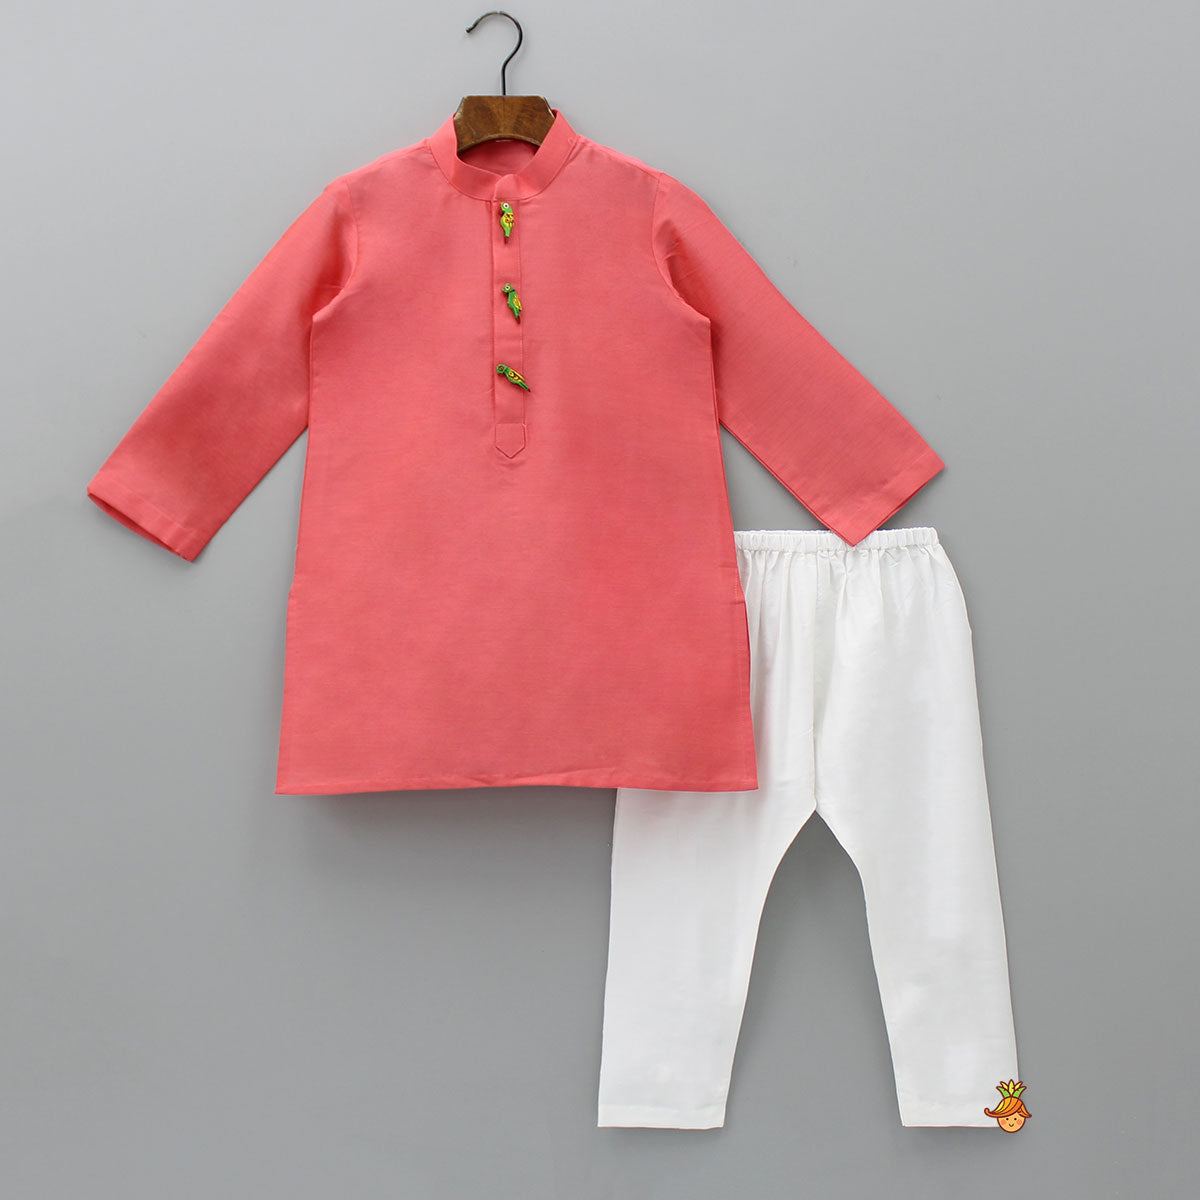 Ethnic Kurta With Wooden Show Buttons And Pyjama